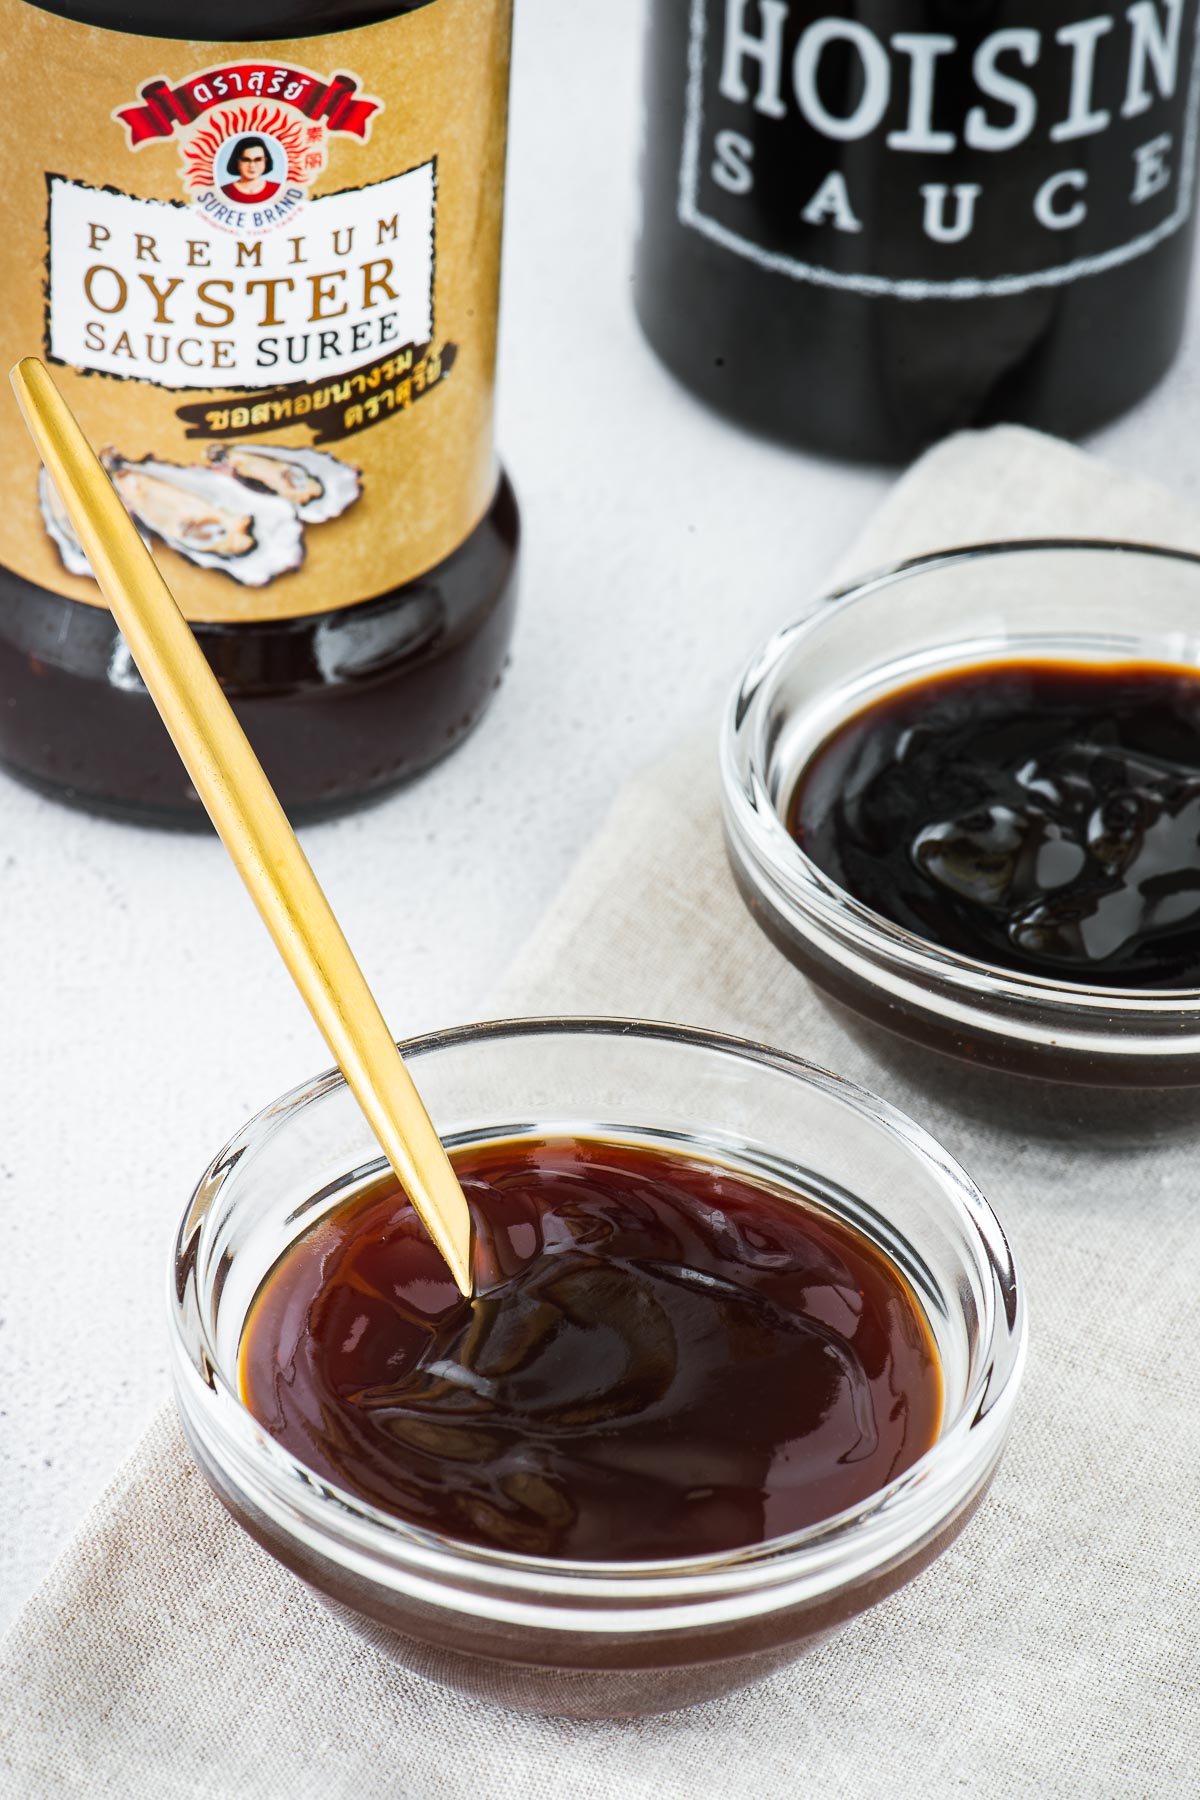 Hoisin sauce vs oyster sauce in small glass bowls with bottles in the background.